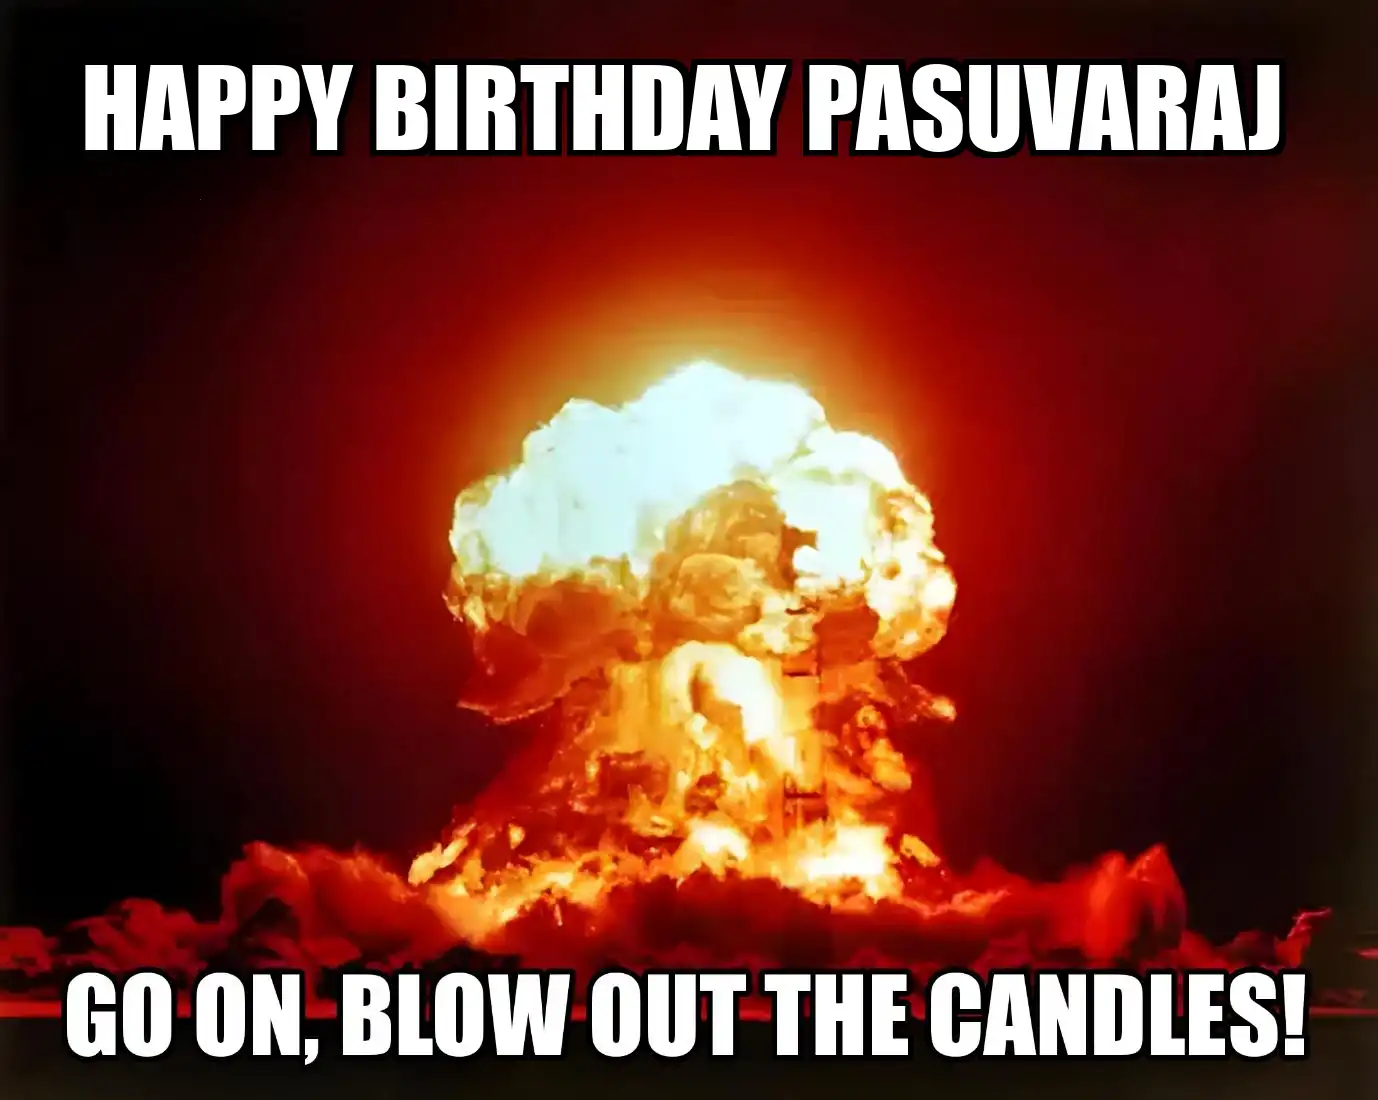 Happy Birthday Pasuvaraj Go On Blow Out The Candles Meme